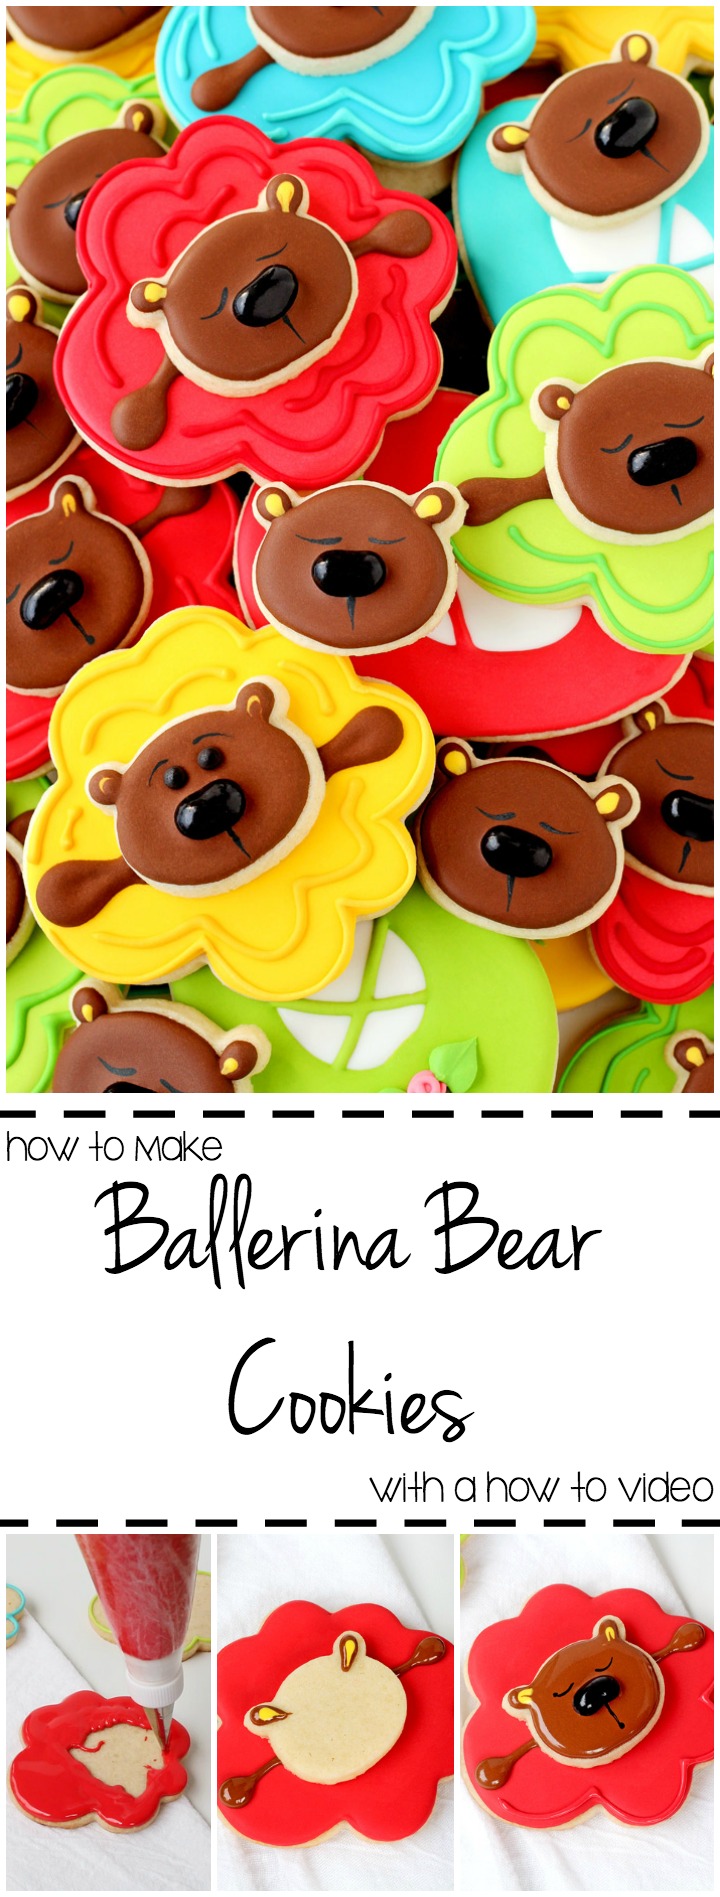 How to Make Adorable Ballerina Bear Cookies with a How to Video | The Bearfoot Baker